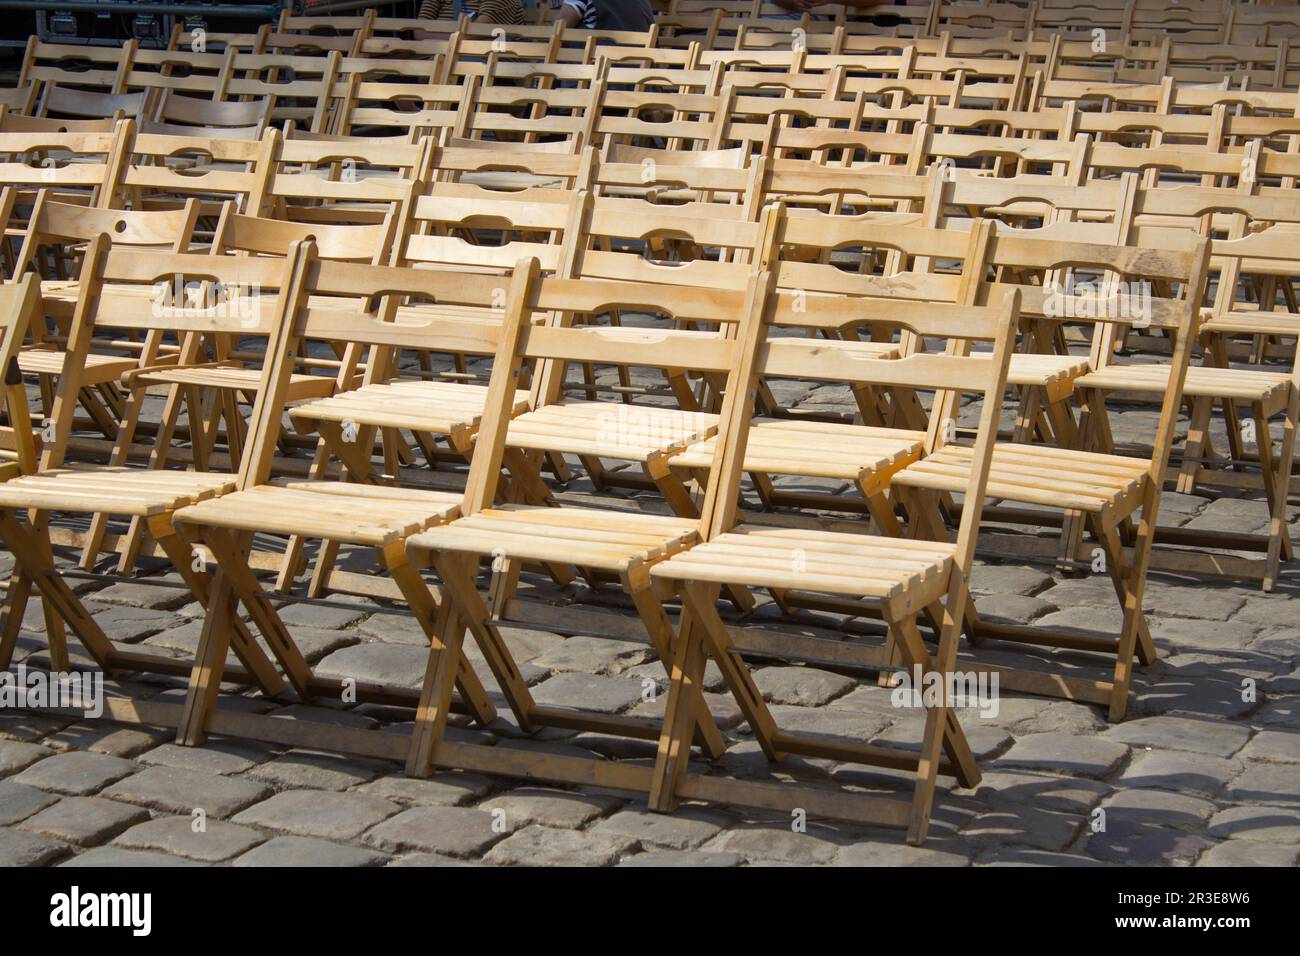 an outstanding event under the open sky, wooden chairs on the streets of the city in a row Stock Photo